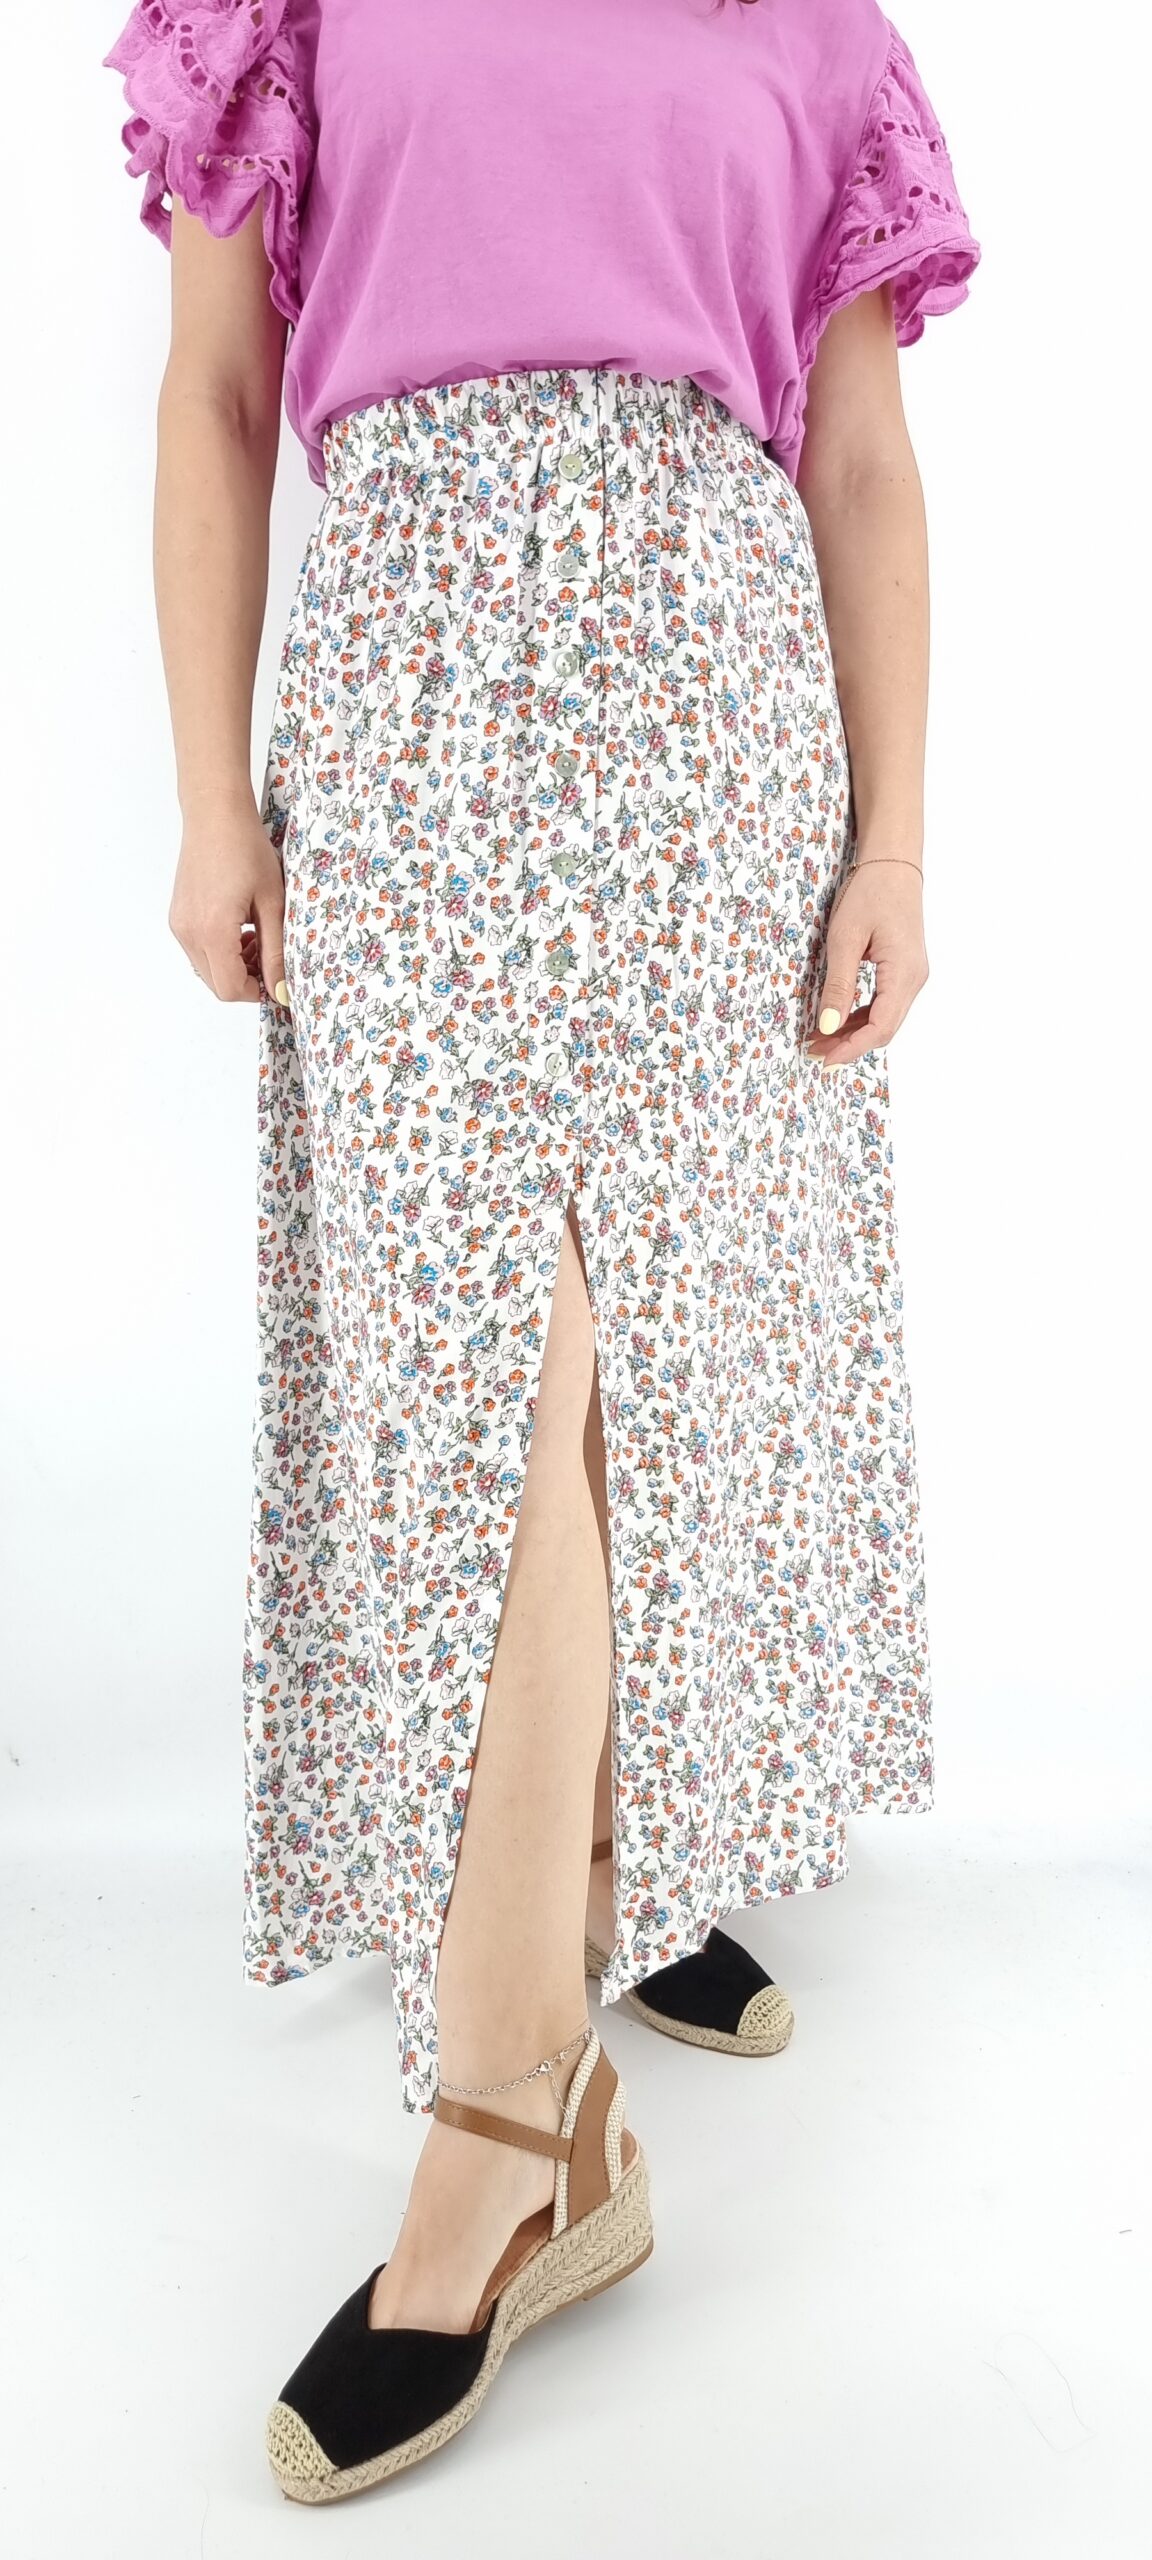 Long floral skirt with elastic waist and decorative buttons white